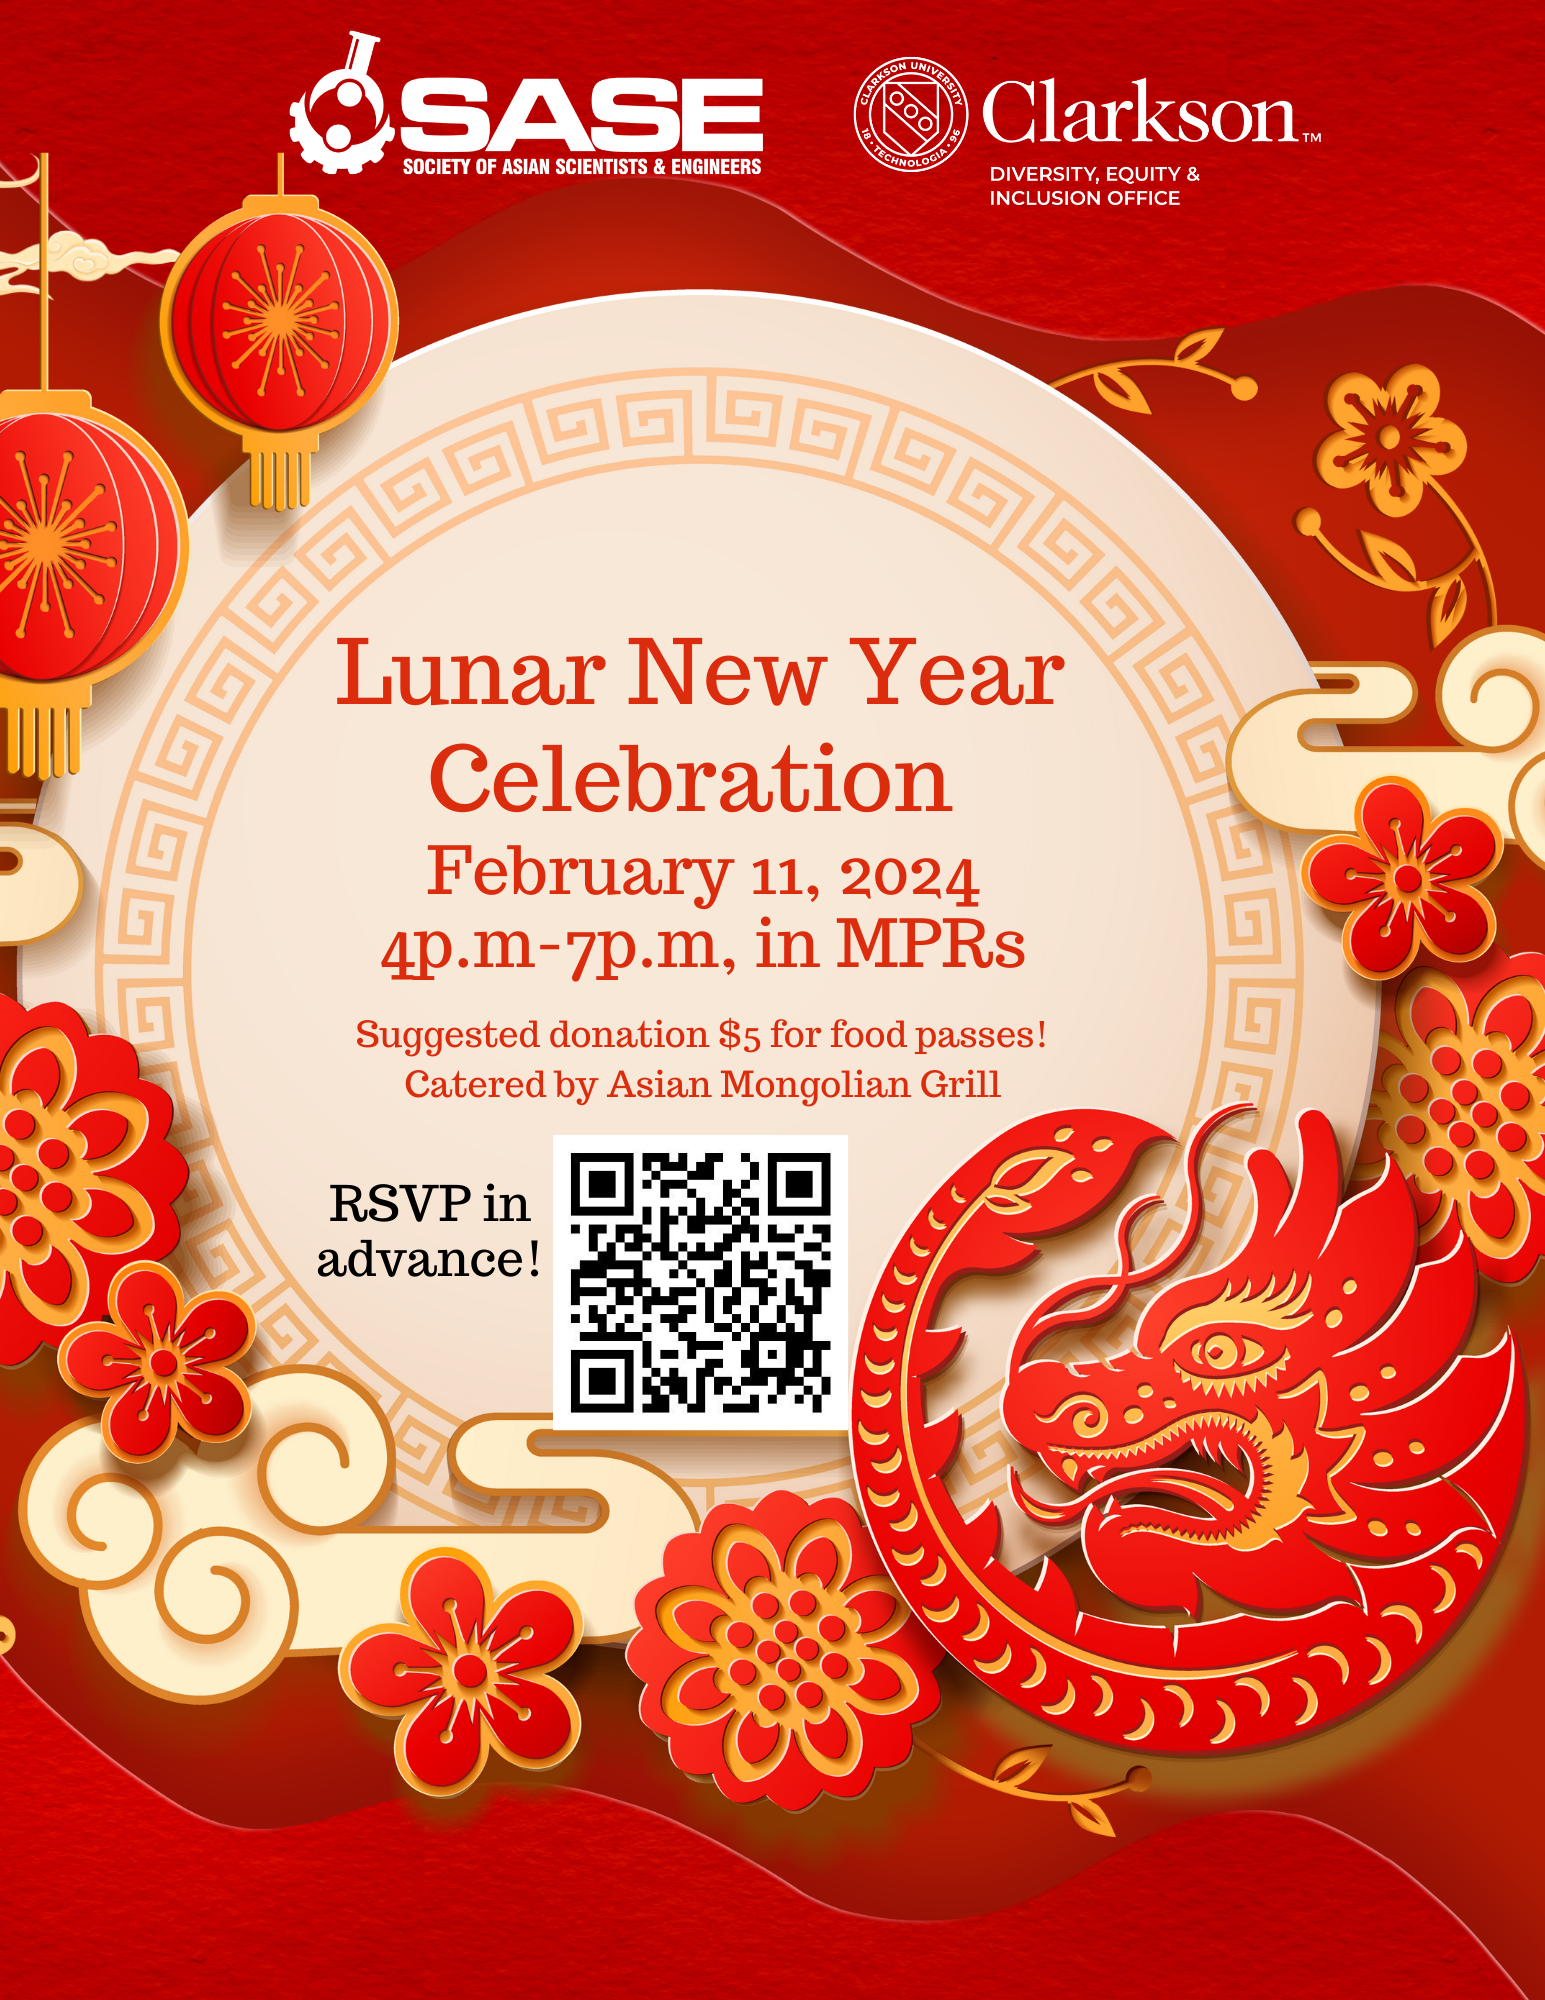 Join us as we celebrate Lunar New Year and the Year of the Golden Dragon! The meal will be catered by the Asian Mongolian Grill Restaurant. A suggested donation of $5 is highly encouraged for a food pass. PLEASE RSVP IN ADVANCE! Date: Sunday, Feb. 11th, 2024 Time: 4:00 pm - 7:00 pm Location: Student Center MPRs RSVP LINK: https://docs.google.com/forms/d/e/1FAIpQLSdvPT3a3ygM6p-_xruutlhettHawdFfYRSvdAKT3ENMLh4lHw/viewform If you have any questions, please contact us via email at: diversity@clarkson.edu